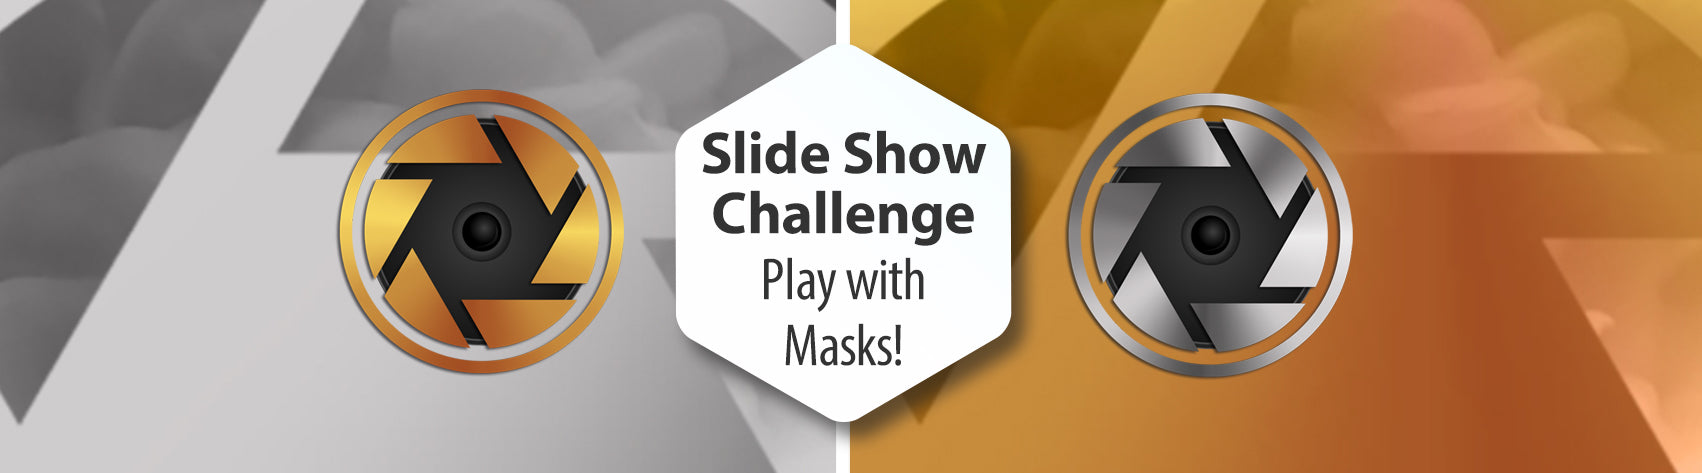 Slide Show Challenge - Play with Masks!